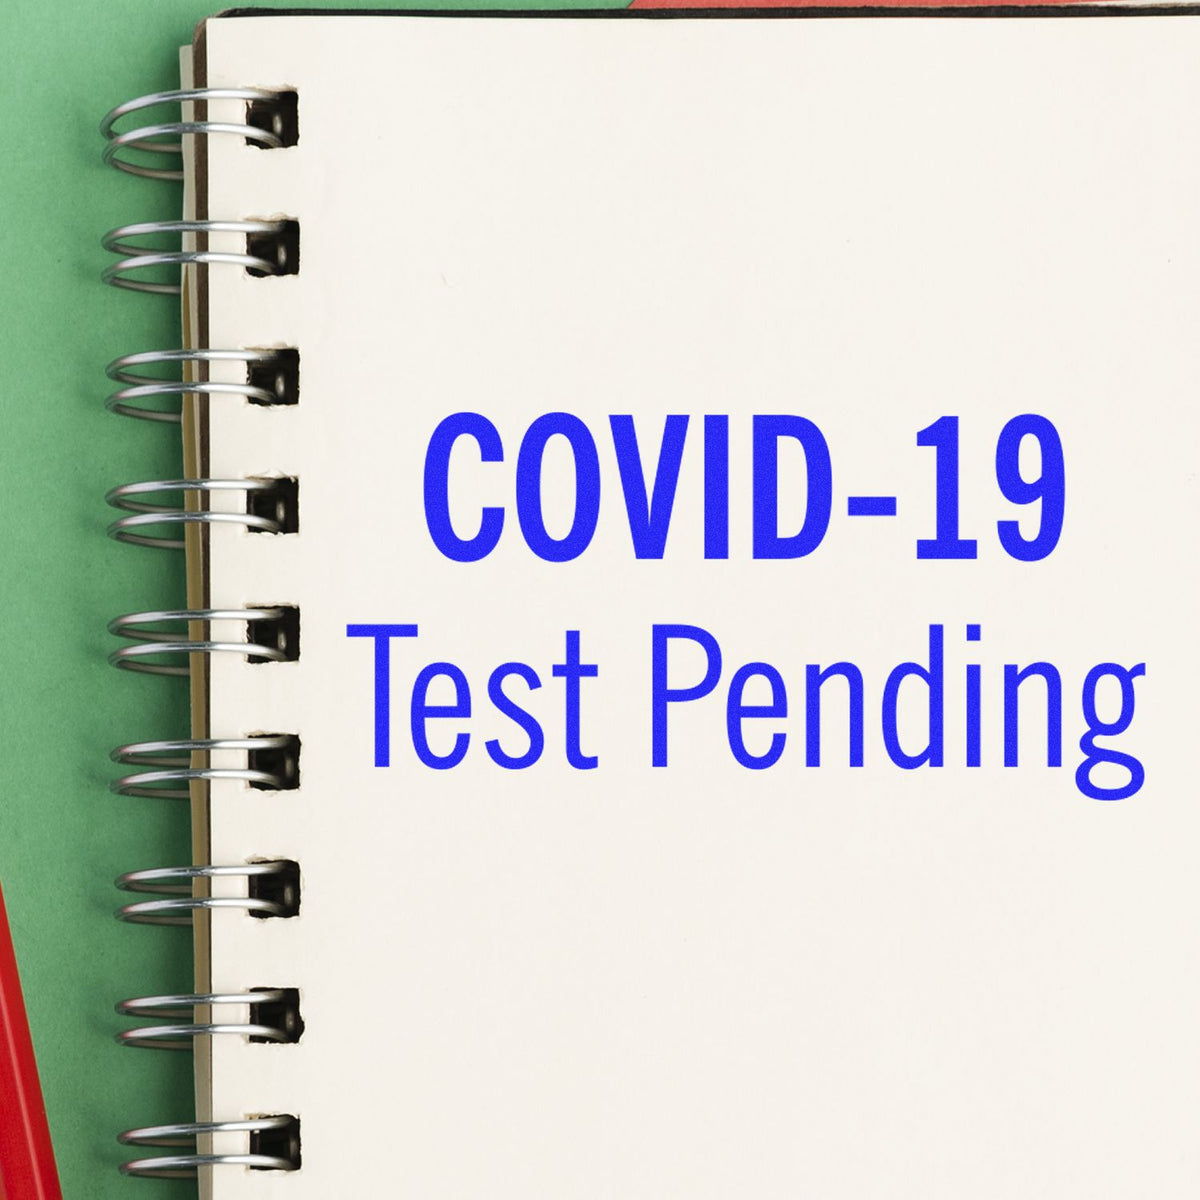 Self-Inking Covid-19 Test Pending Stamp In Use Photo